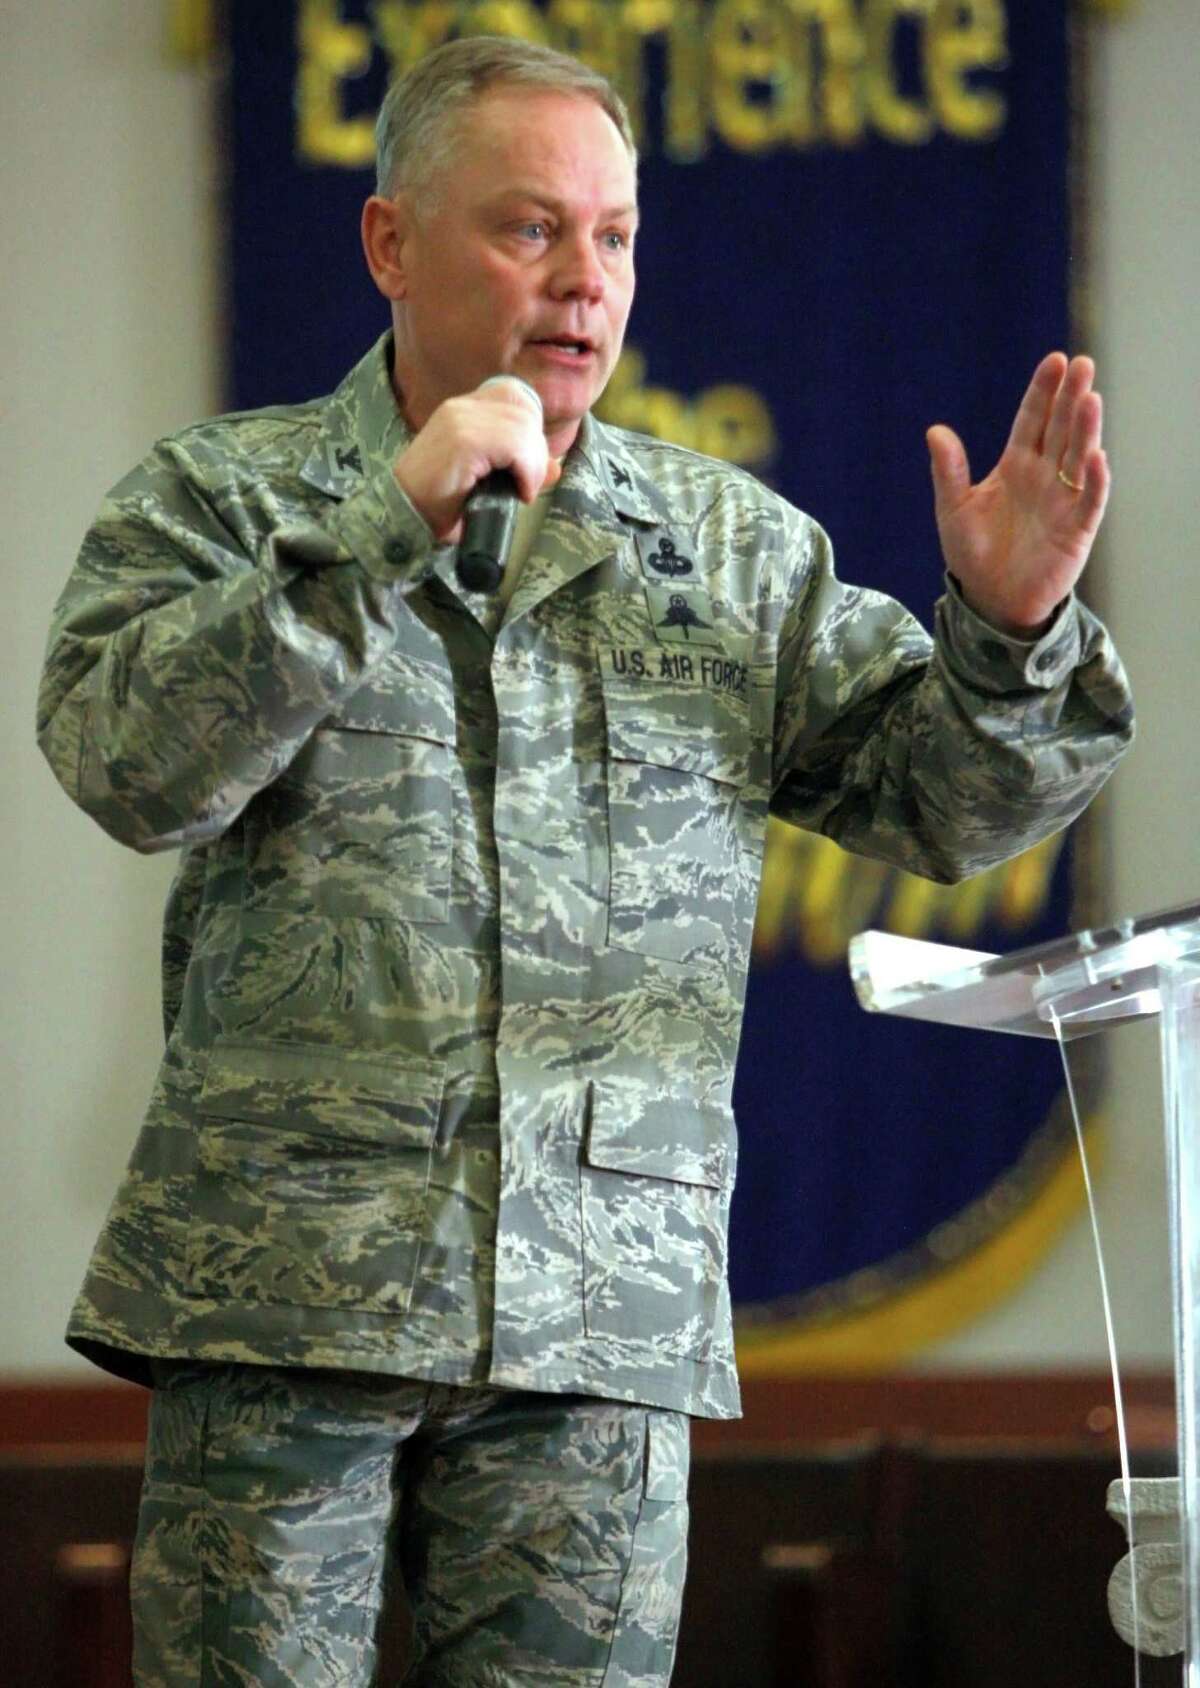 Col. Glenn Palmer, commander of the 737th Training Group at Lackland AFB, speaks Friday March 2, 2012 to trainees during so-called Zero Week activities.